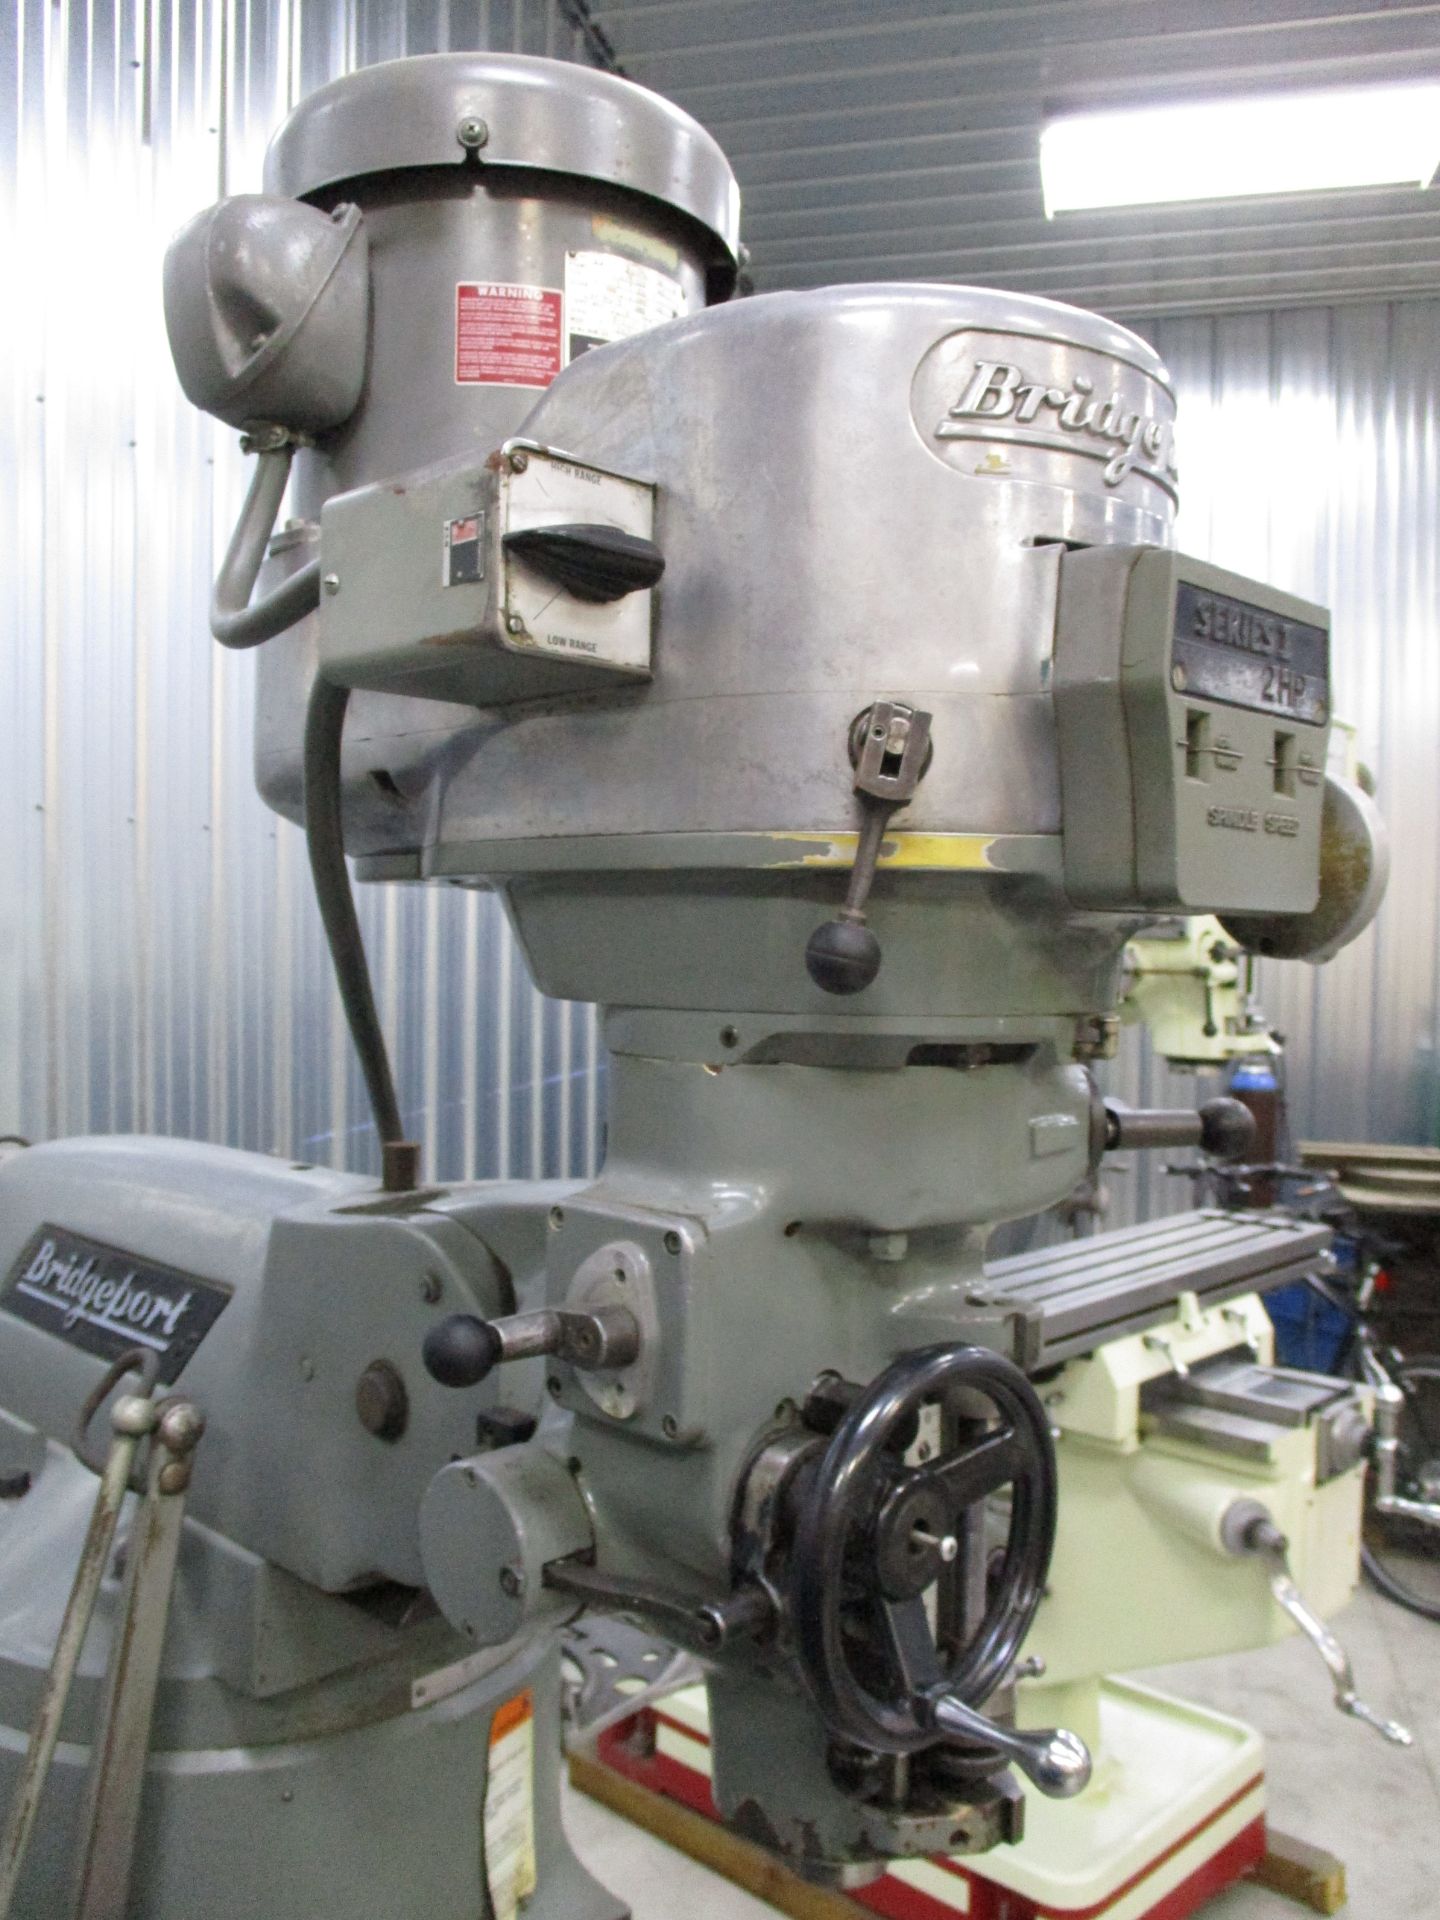 Bridgeport Series I, 2 HP Vertical Mill, s/n 12BR245602, 9” X 42” Table, Accurite D.R.O., Loading - Image 4 of 6